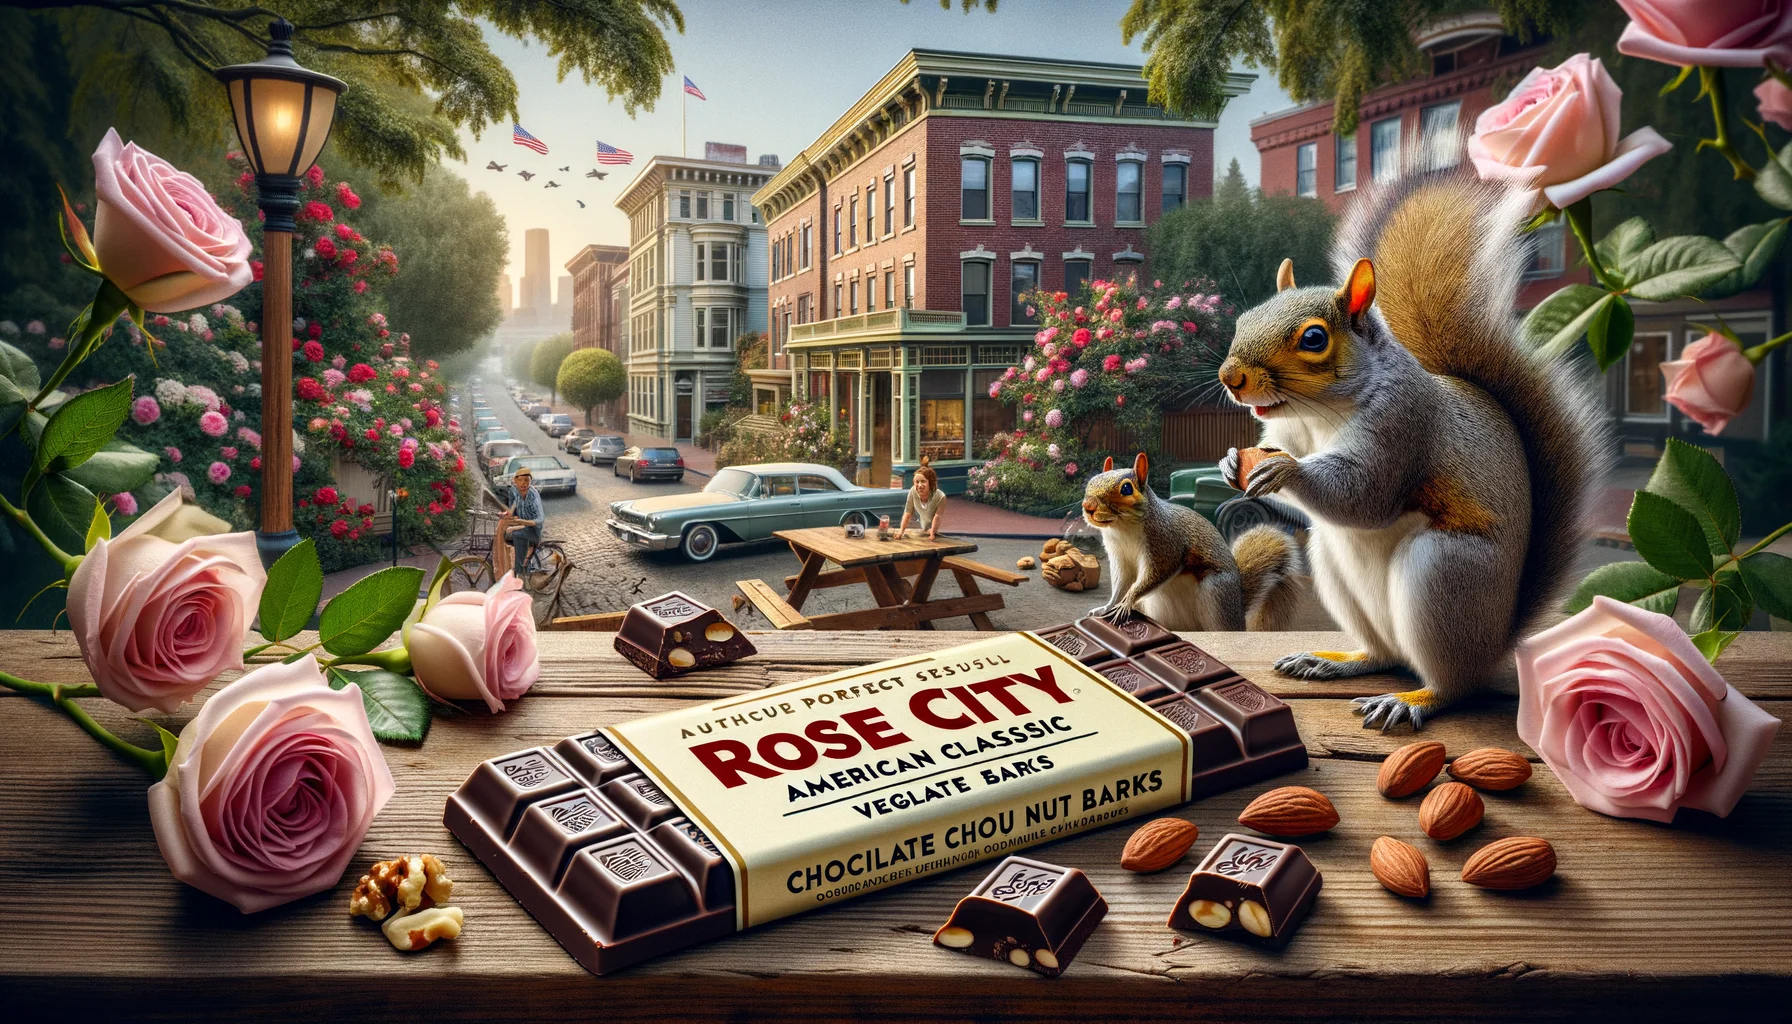 An entertaining realistic image of 'Rose City American Classic Vegan Chocolate Nut Barks'. This image showcases the classic vegan chocolate bars laid out against the backdrop of a quaint urban setting synonymous with the city of roses. The bars are carefully placed on a rustic wooden table, exuding elegance and class. Nearby, a squirrel can be seen curiously eyeing the barks, creating a humorous narrative, while in the background, blooming roses and iconic American architectural features add depth to the scene. This perfect scenario should capture the essence of American Classic Vegan Chocolate Nut Bars from Rose City, adding a dash of humor and realism.